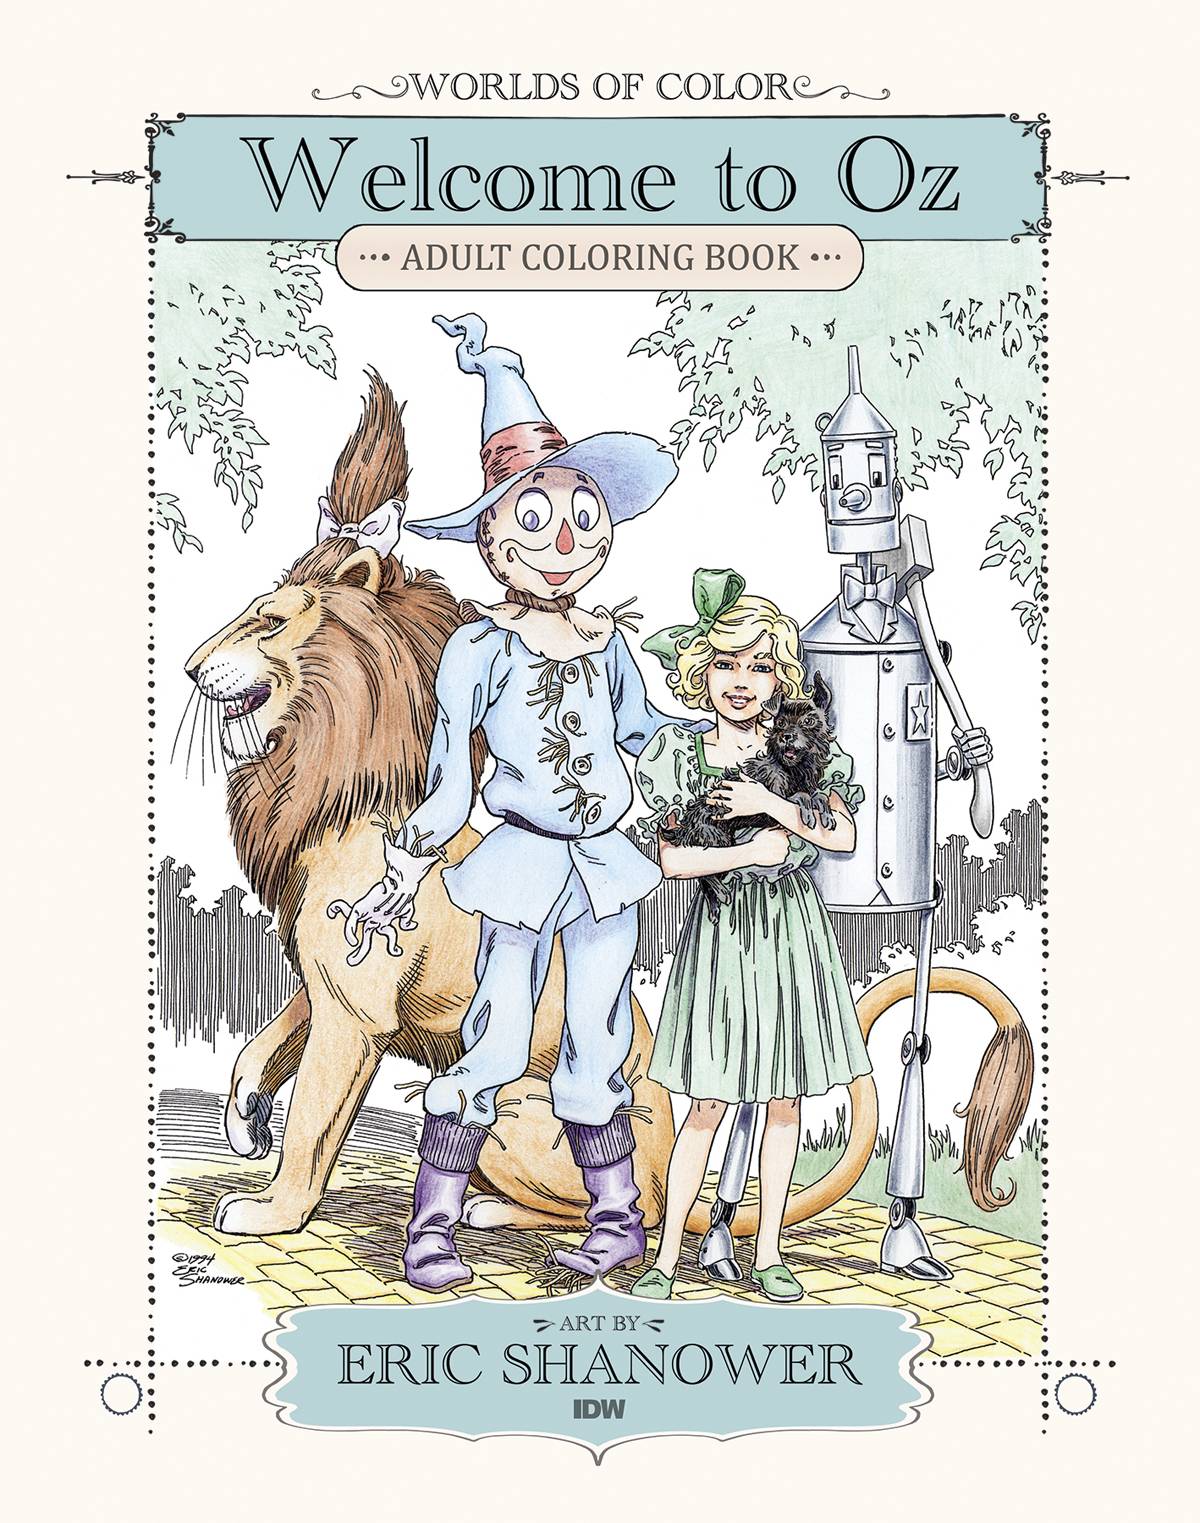 Worlds of Color Welcome To Oz Adult Coloring Book Graphic Novel